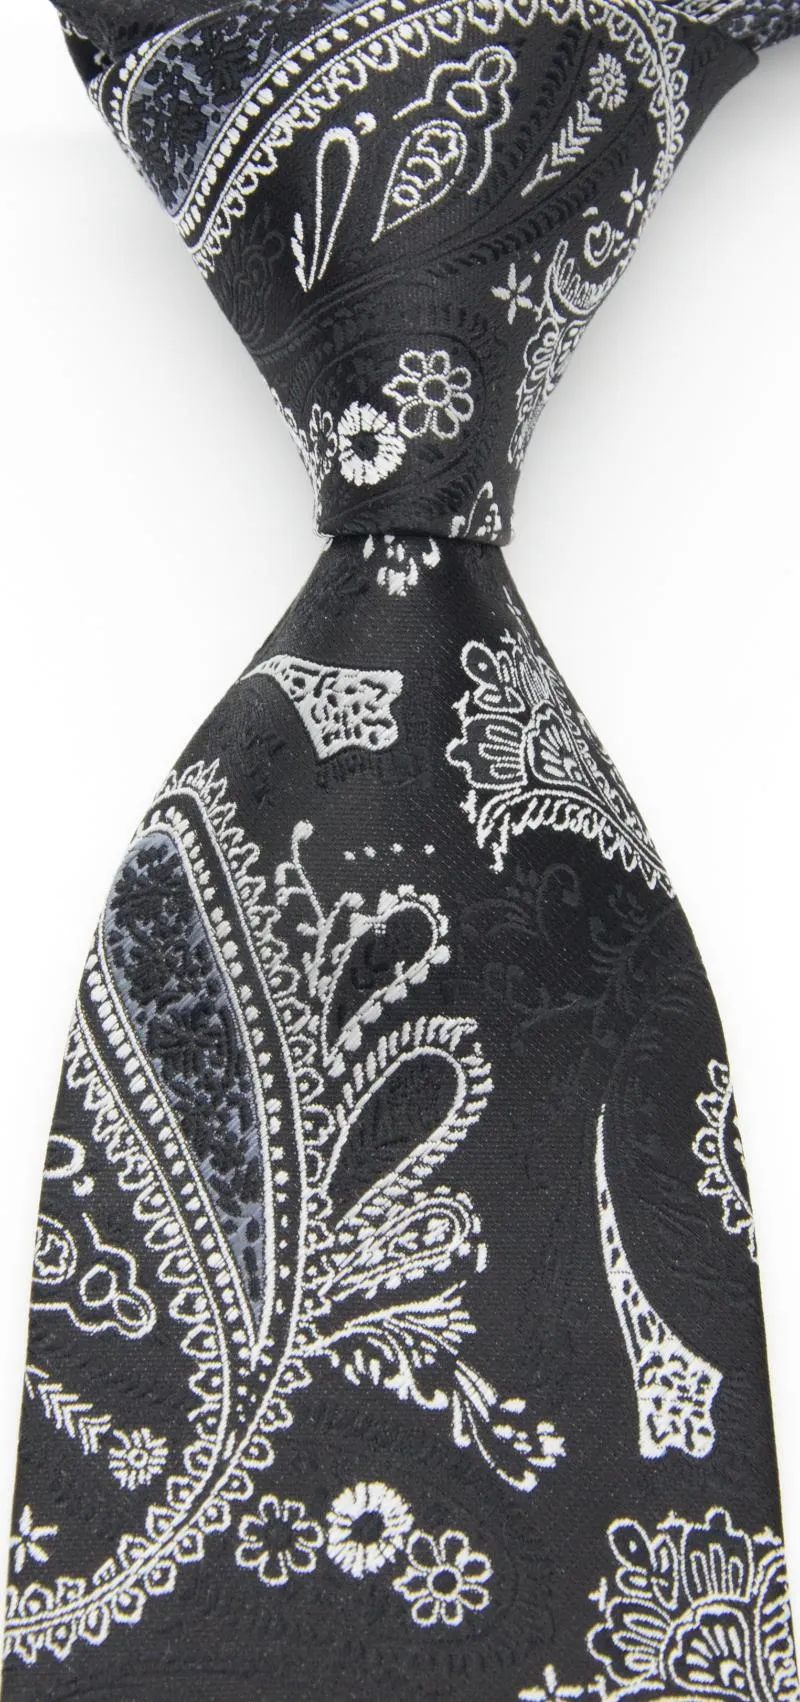 Bow Ties Silk Floral Tie Men's Paisley Print Black White For Men Formal Business Luxury Wedding Party NecktiesBow